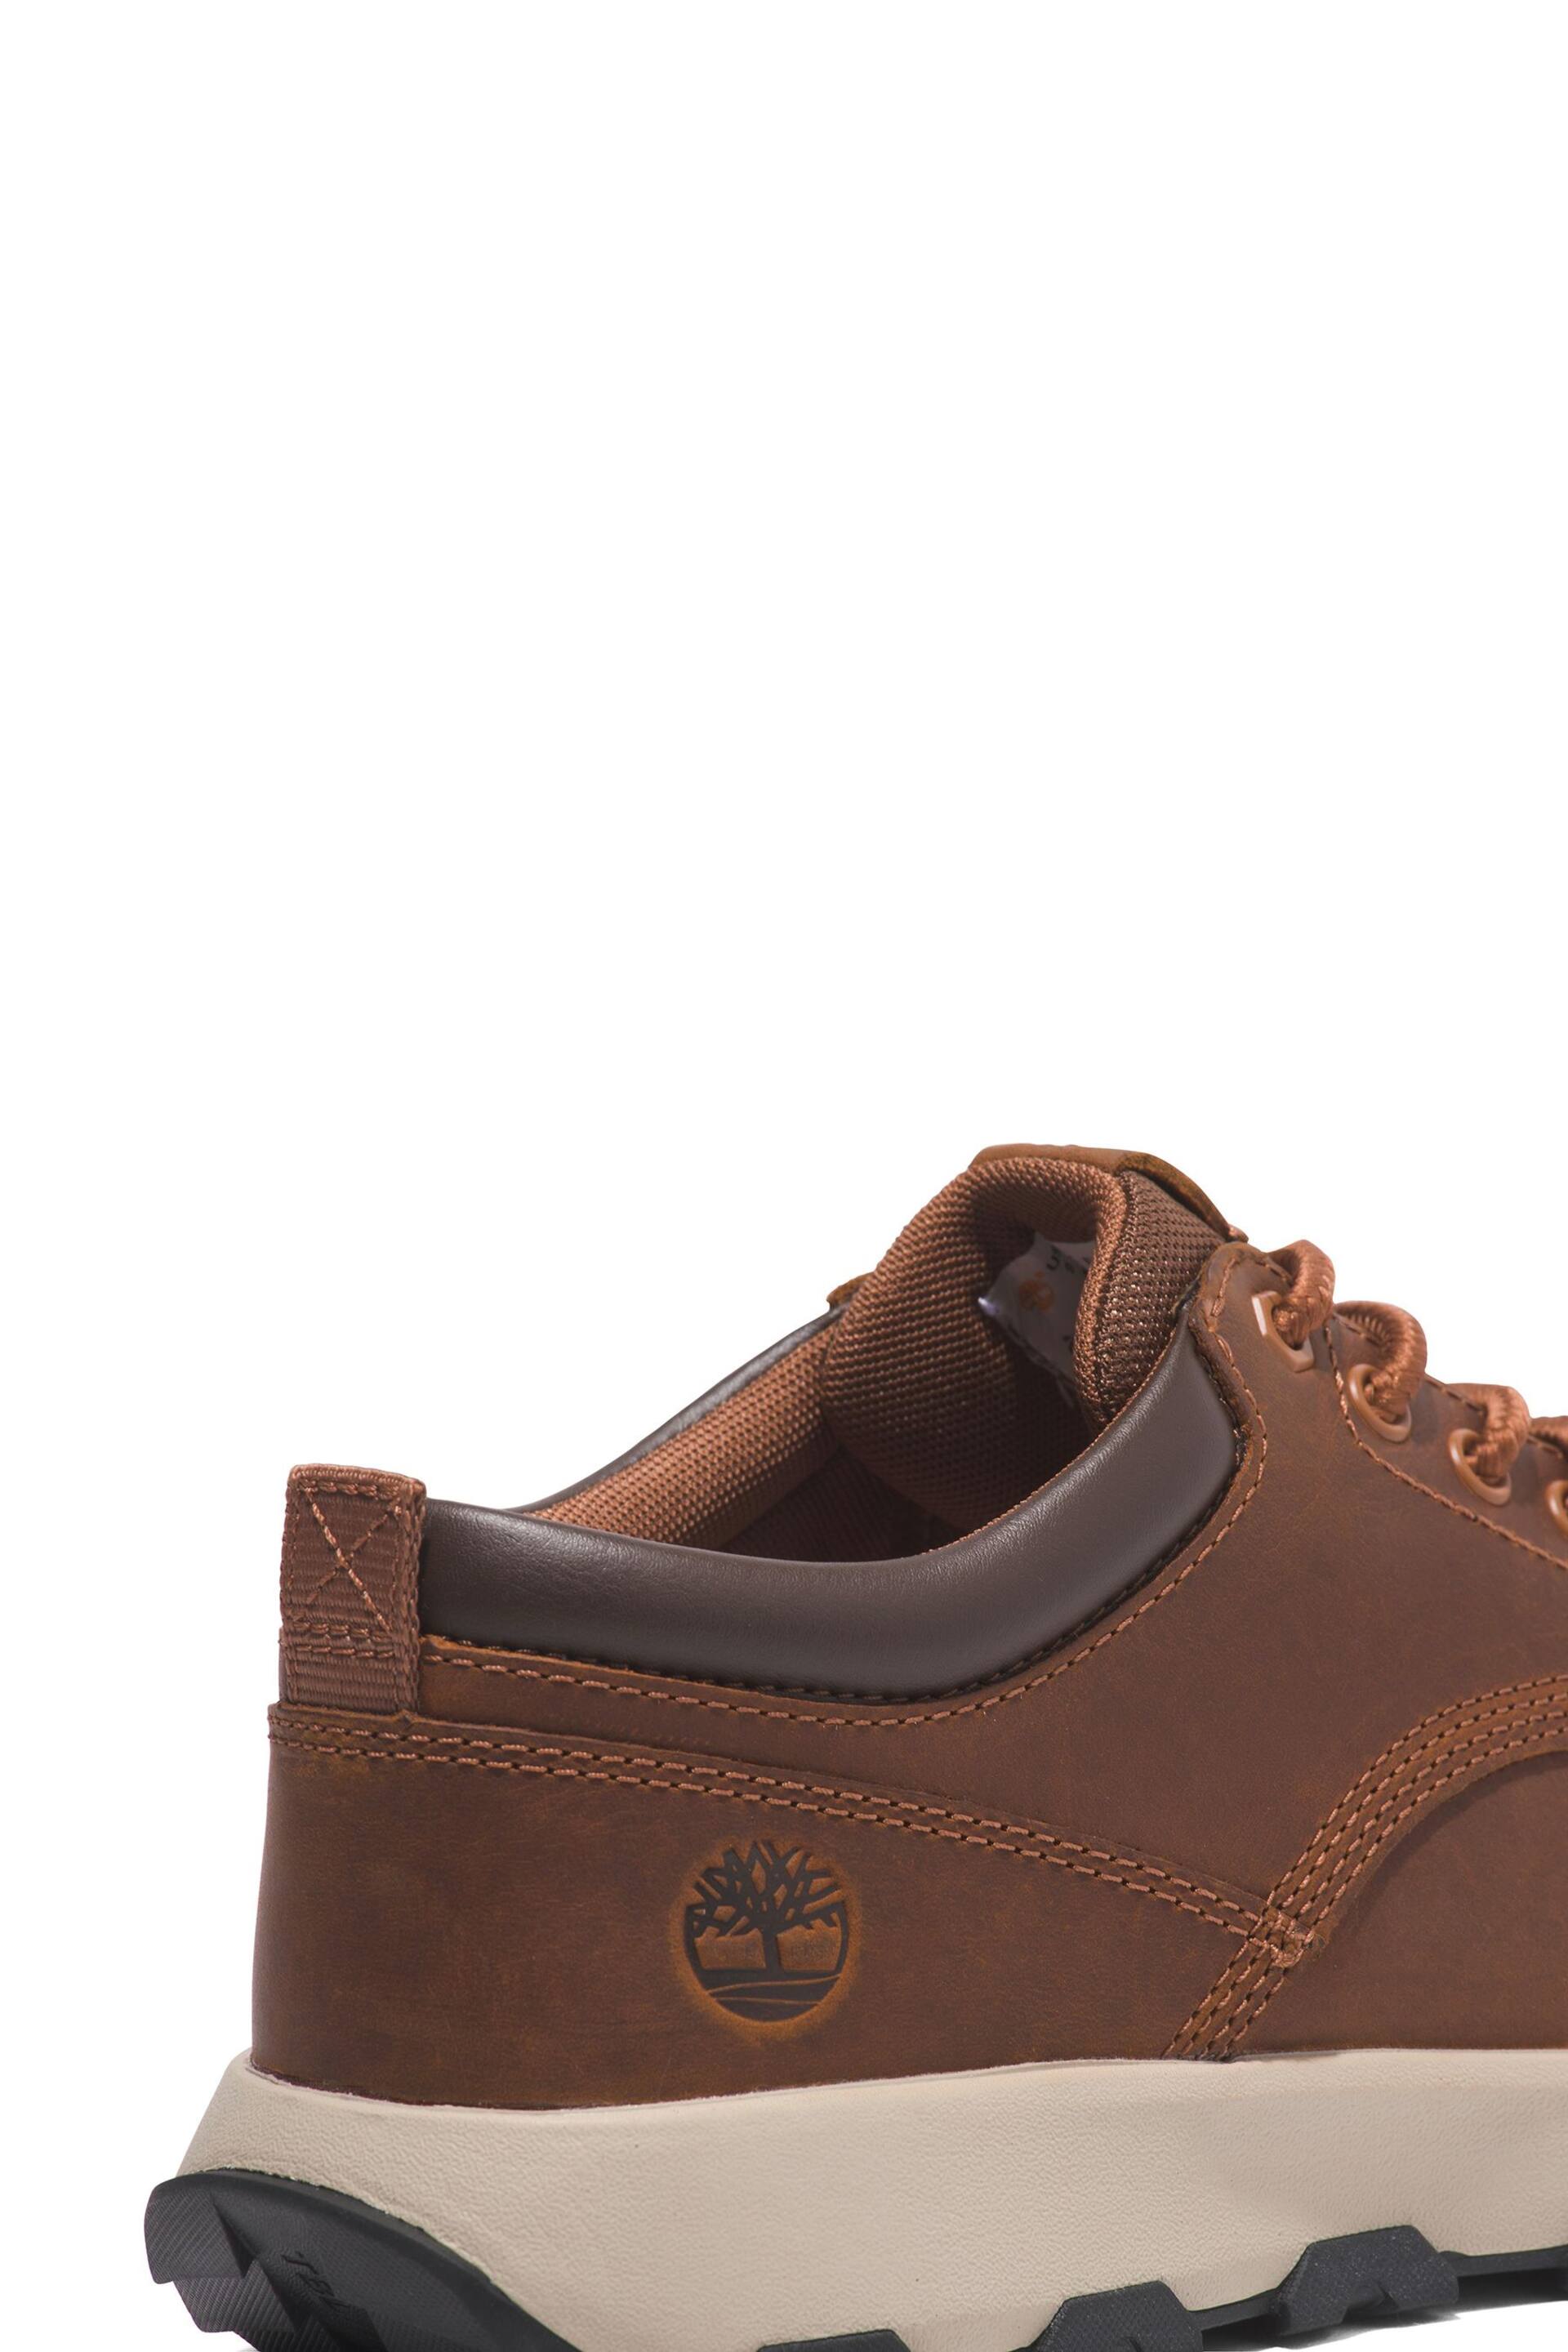 Timberland Winsor Park Ox Brown Trainers - Image 5 of 5